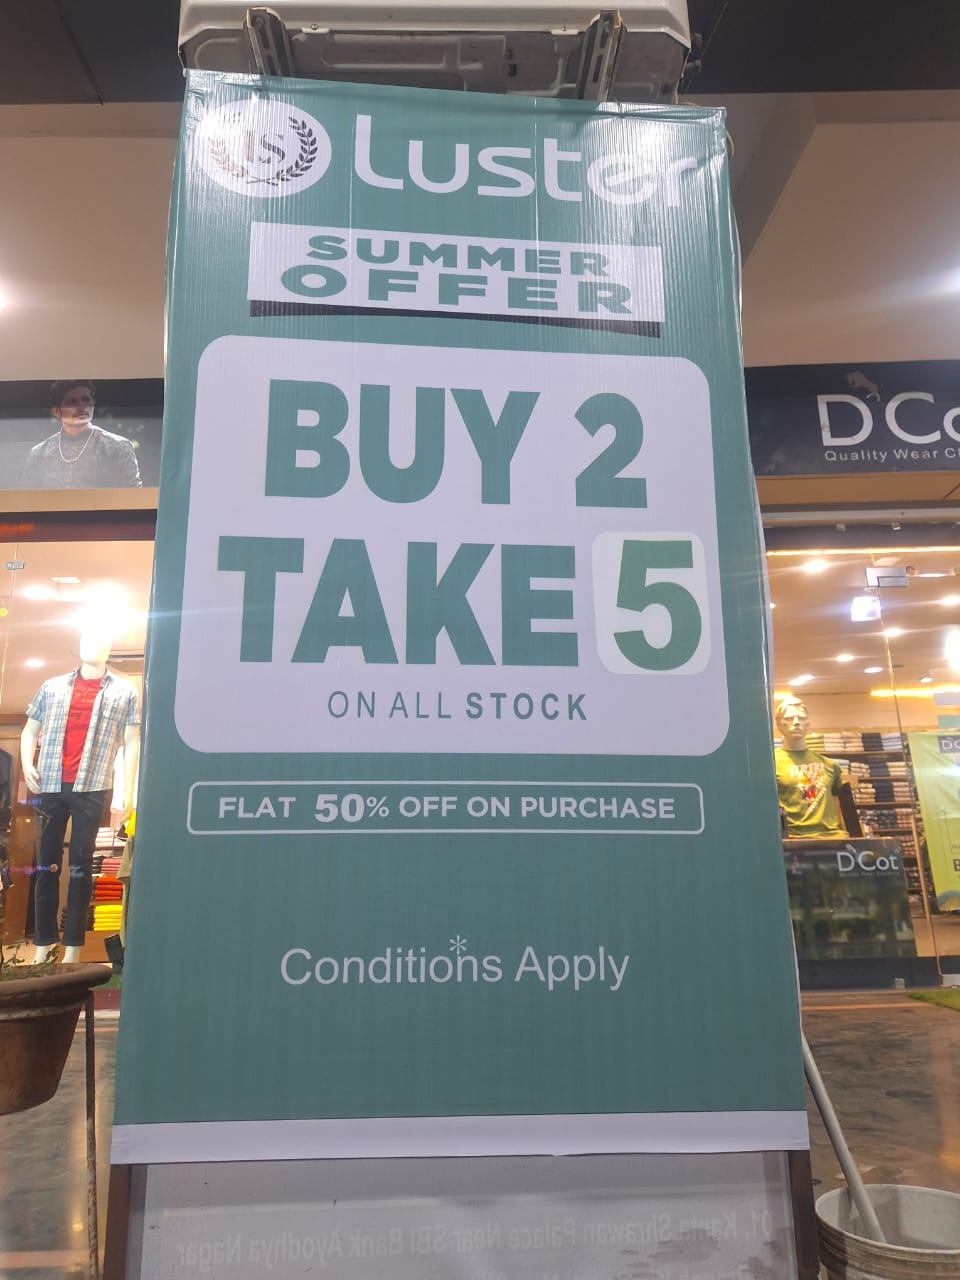 BUY 2 TAKE 5 ON ALL STOCK Deal @LUSTER, Bhopal